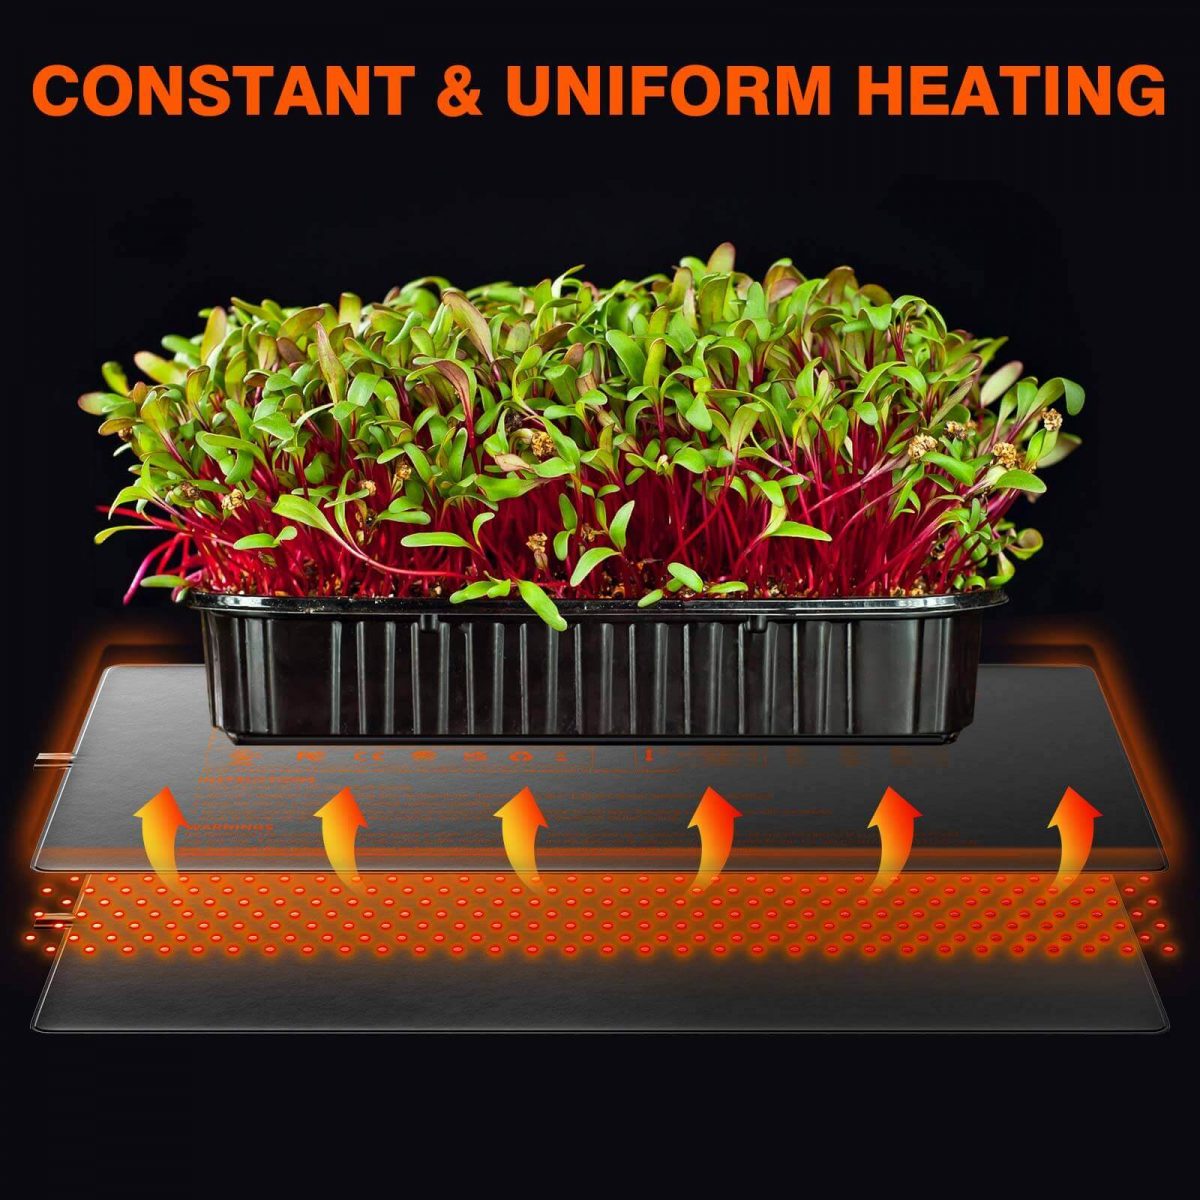 Spider-Farmer-Seedling-Heat-Mat-48X20.75-1pack-with-controller-3